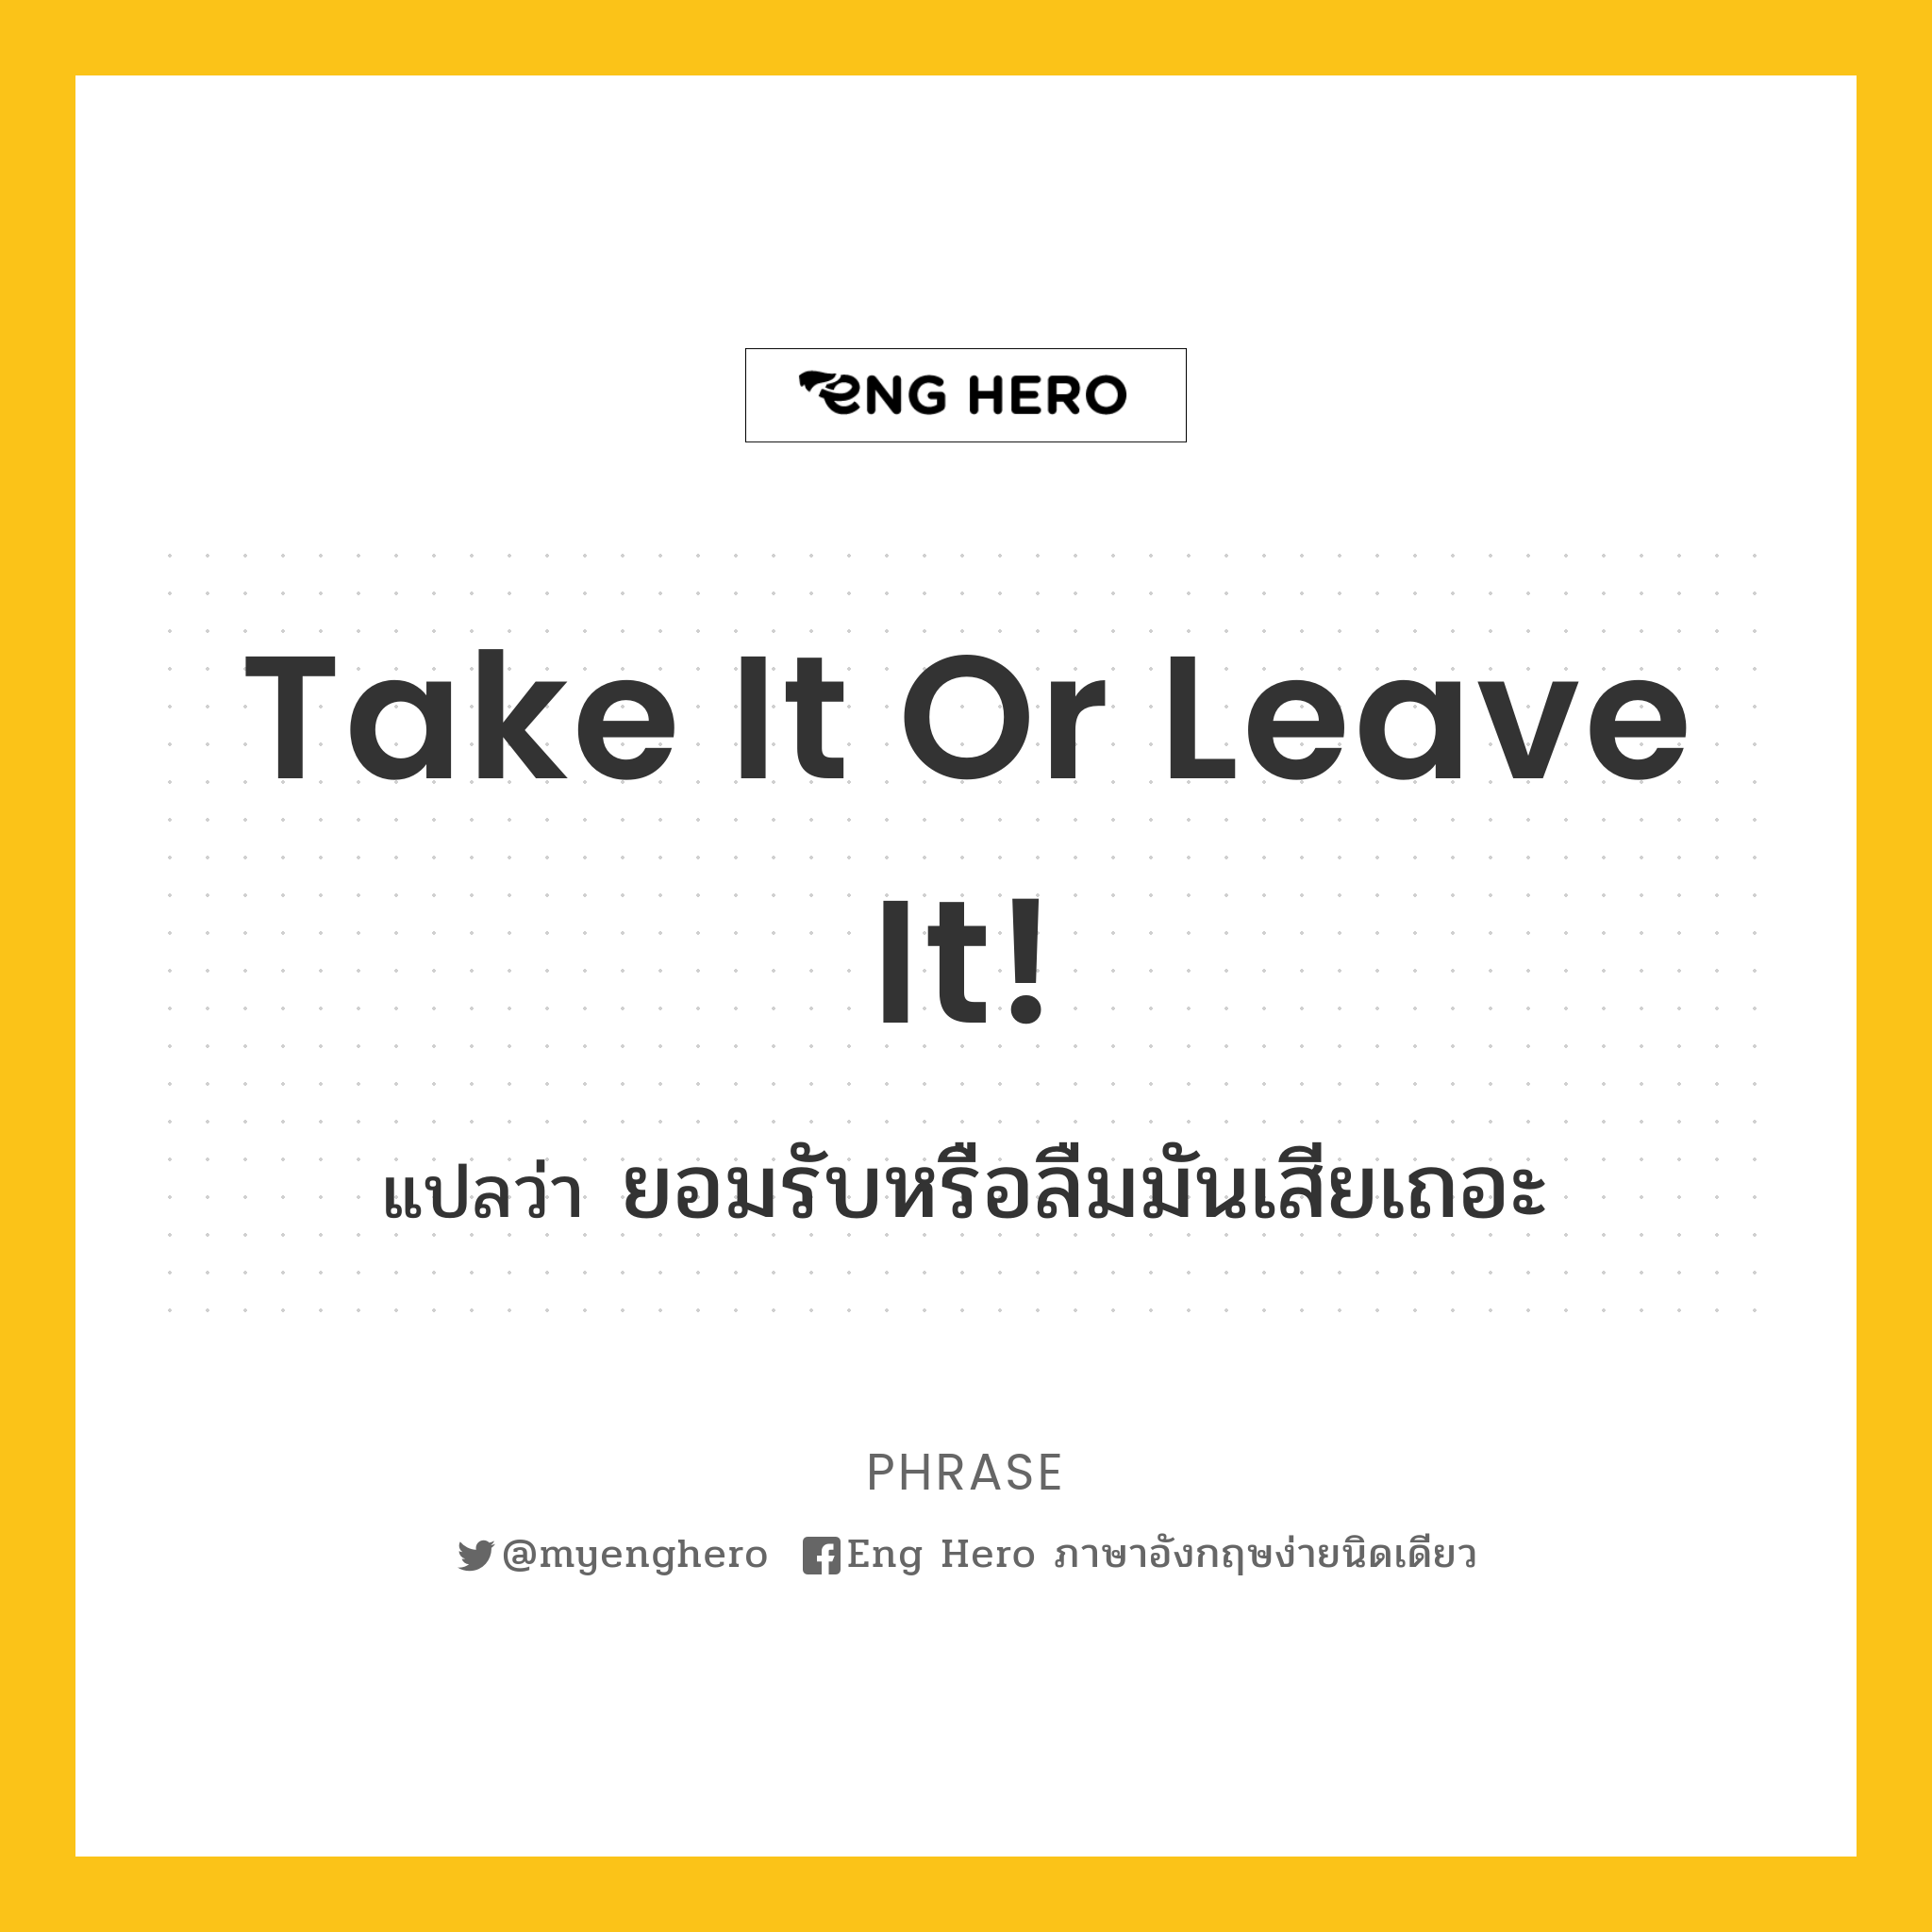 Take it or leave it!